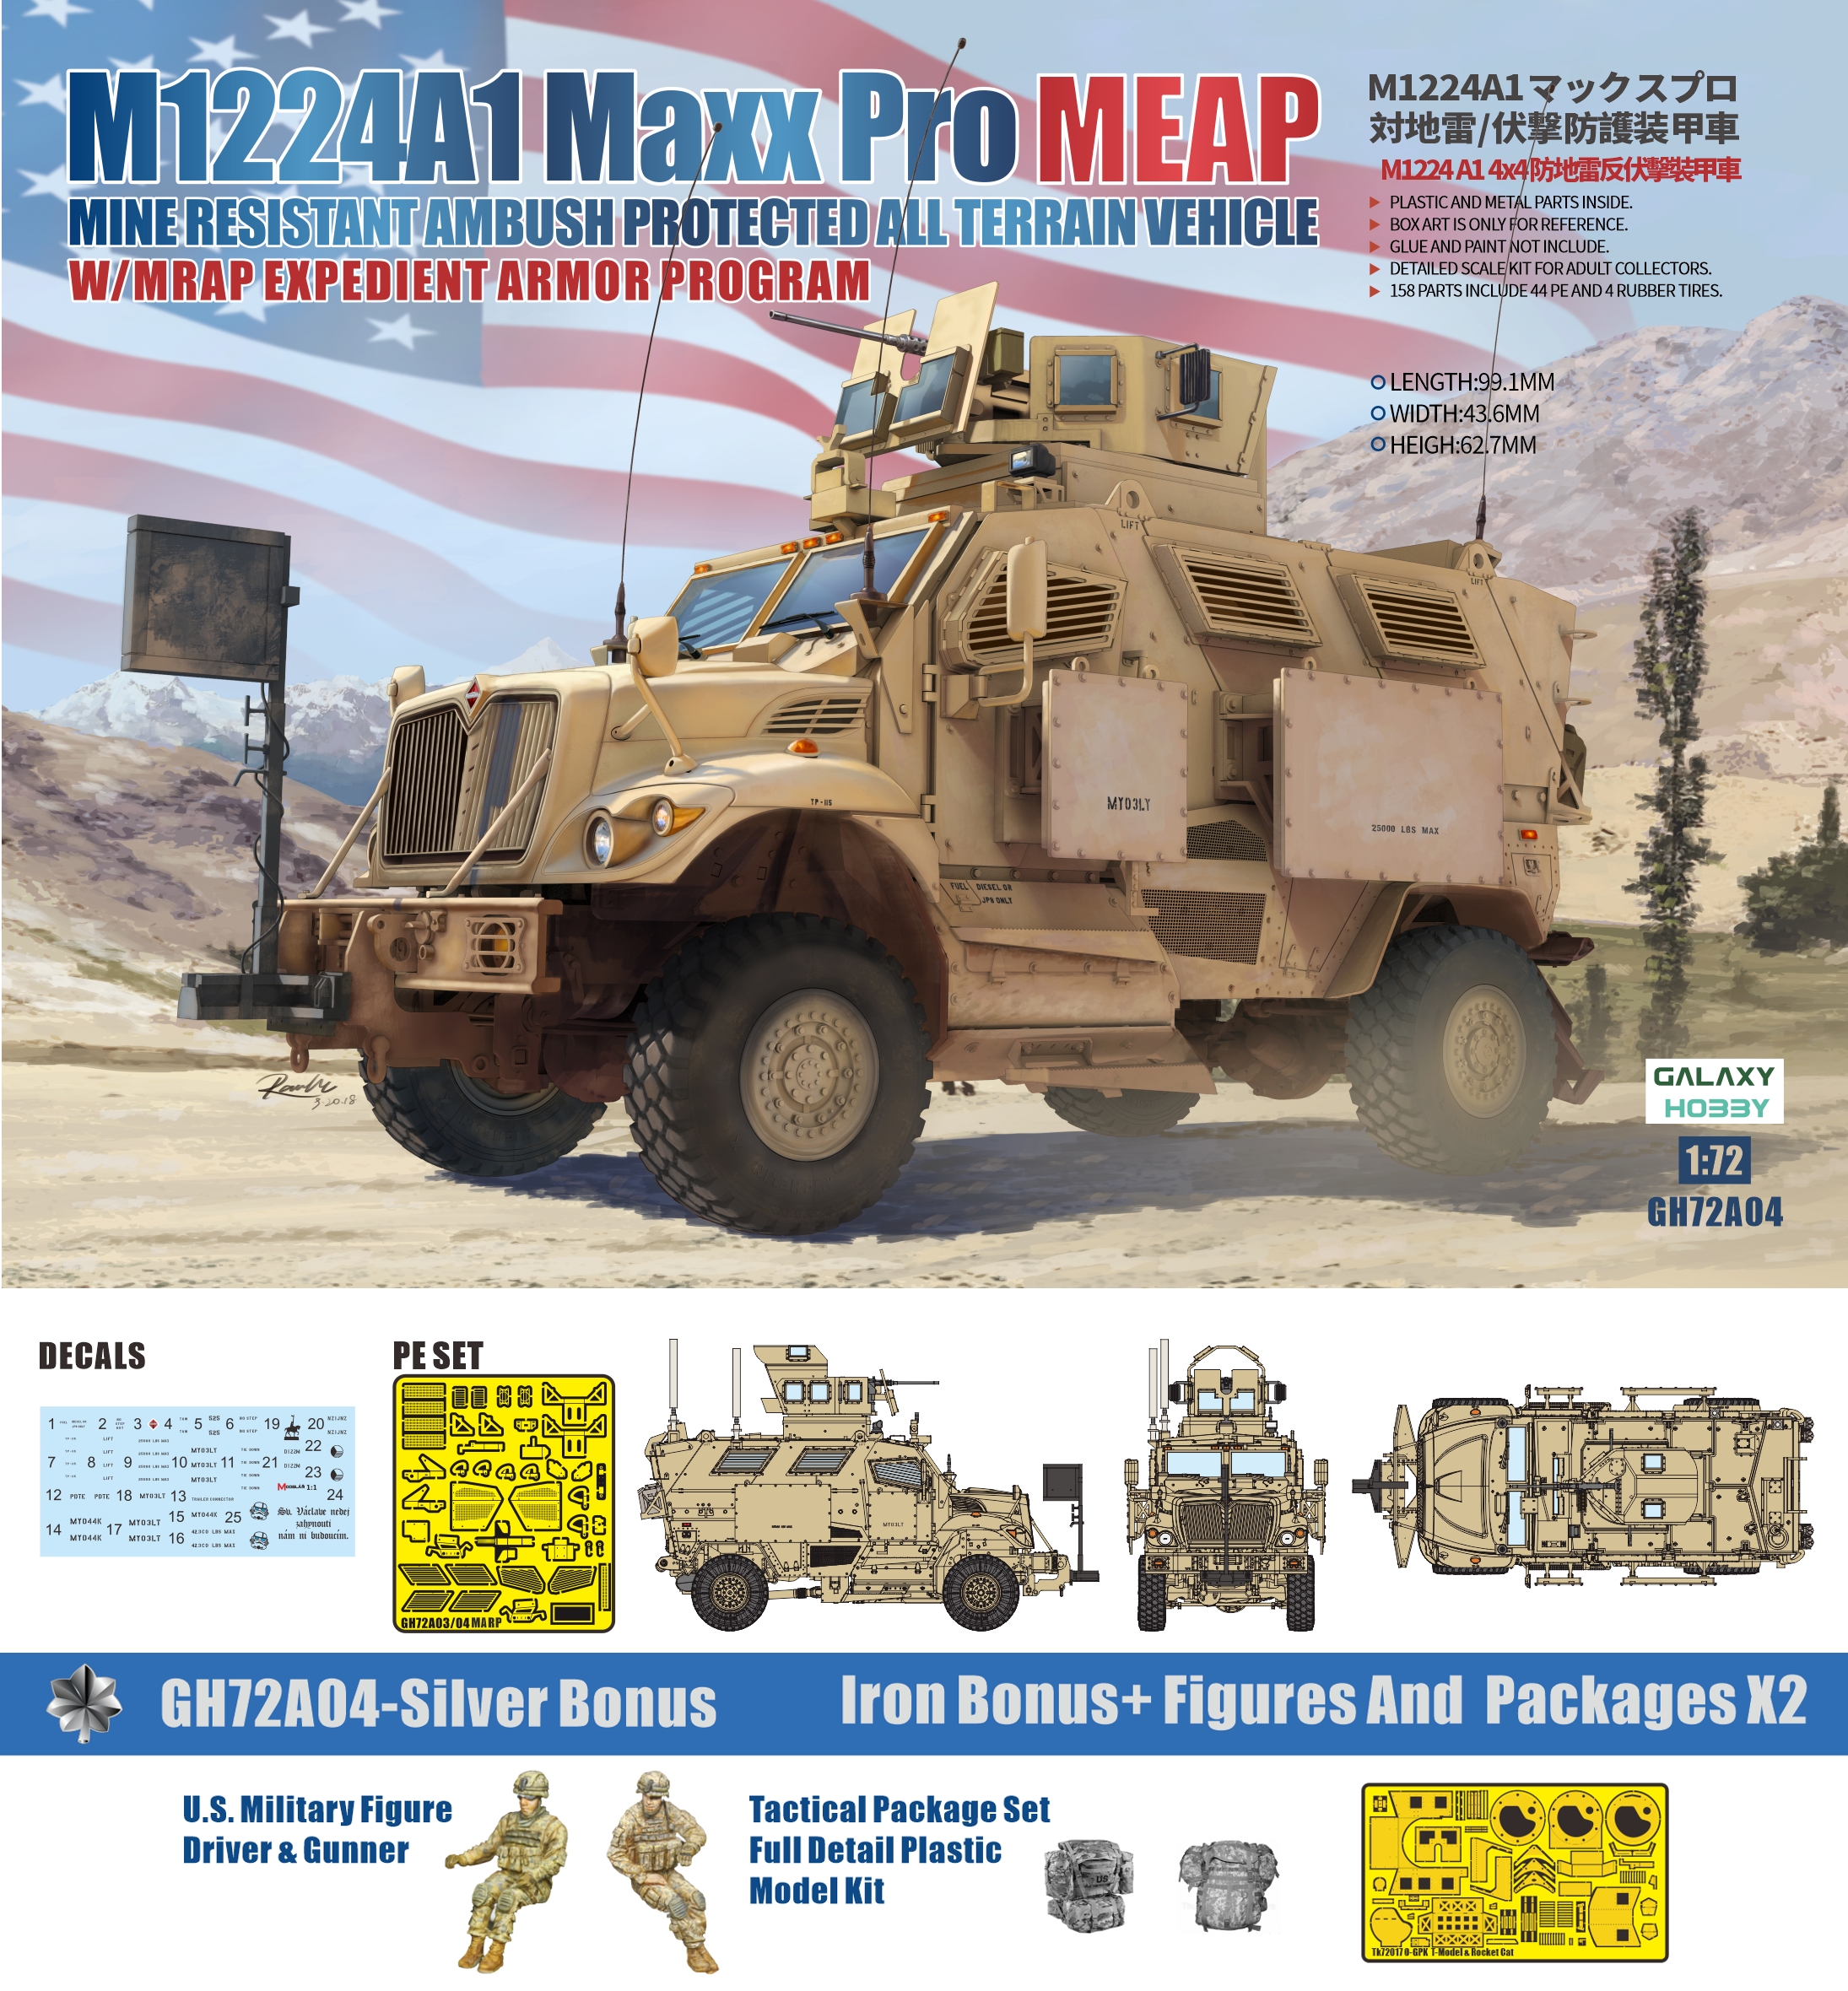 M1224A1 Maxx Pro MEAP with MRAP Expedient Armor Program - Click Image to Close